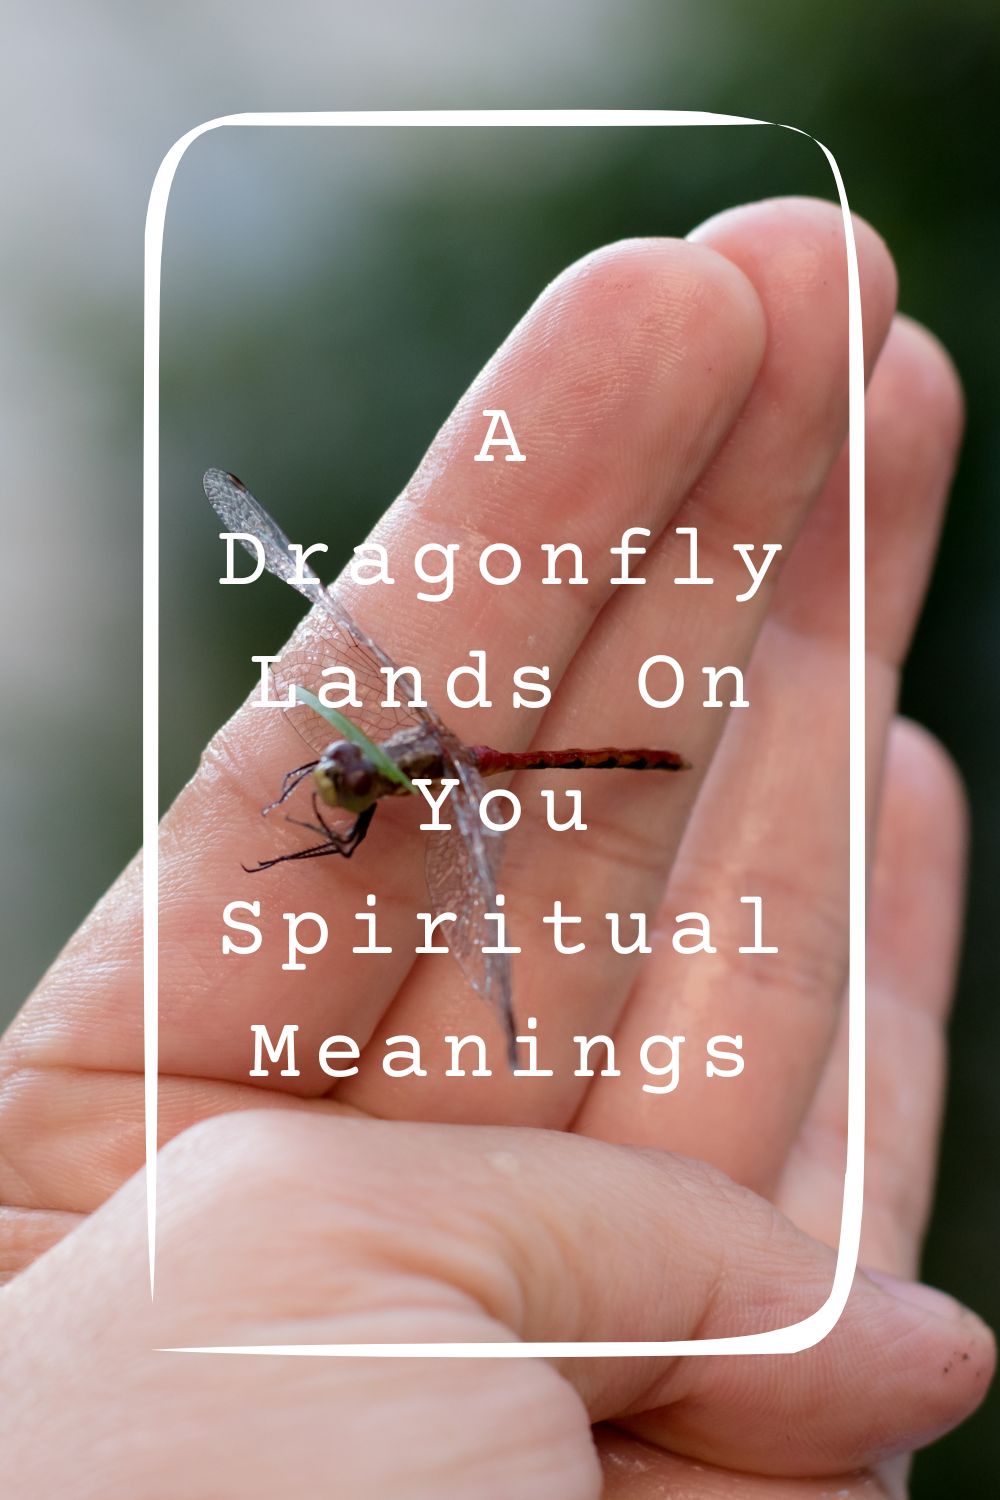 9 A Dragonfly Lands On You Spiritual Meanings4